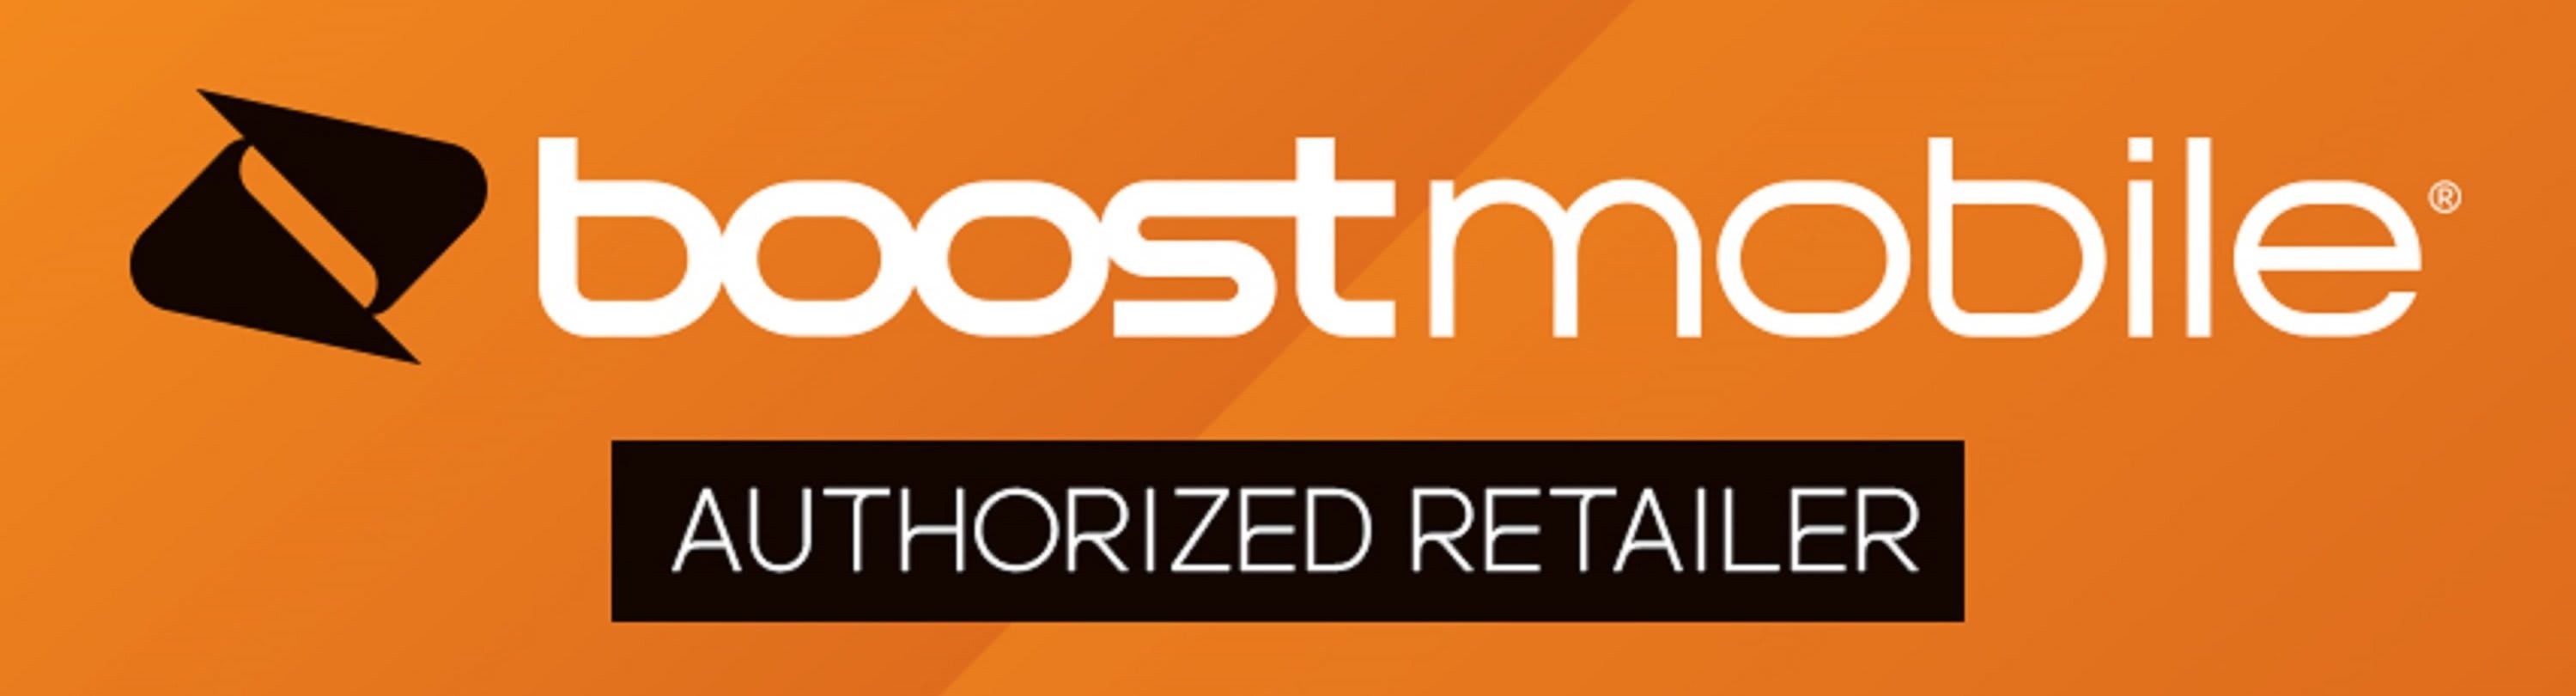 Boost Mobile By JRP